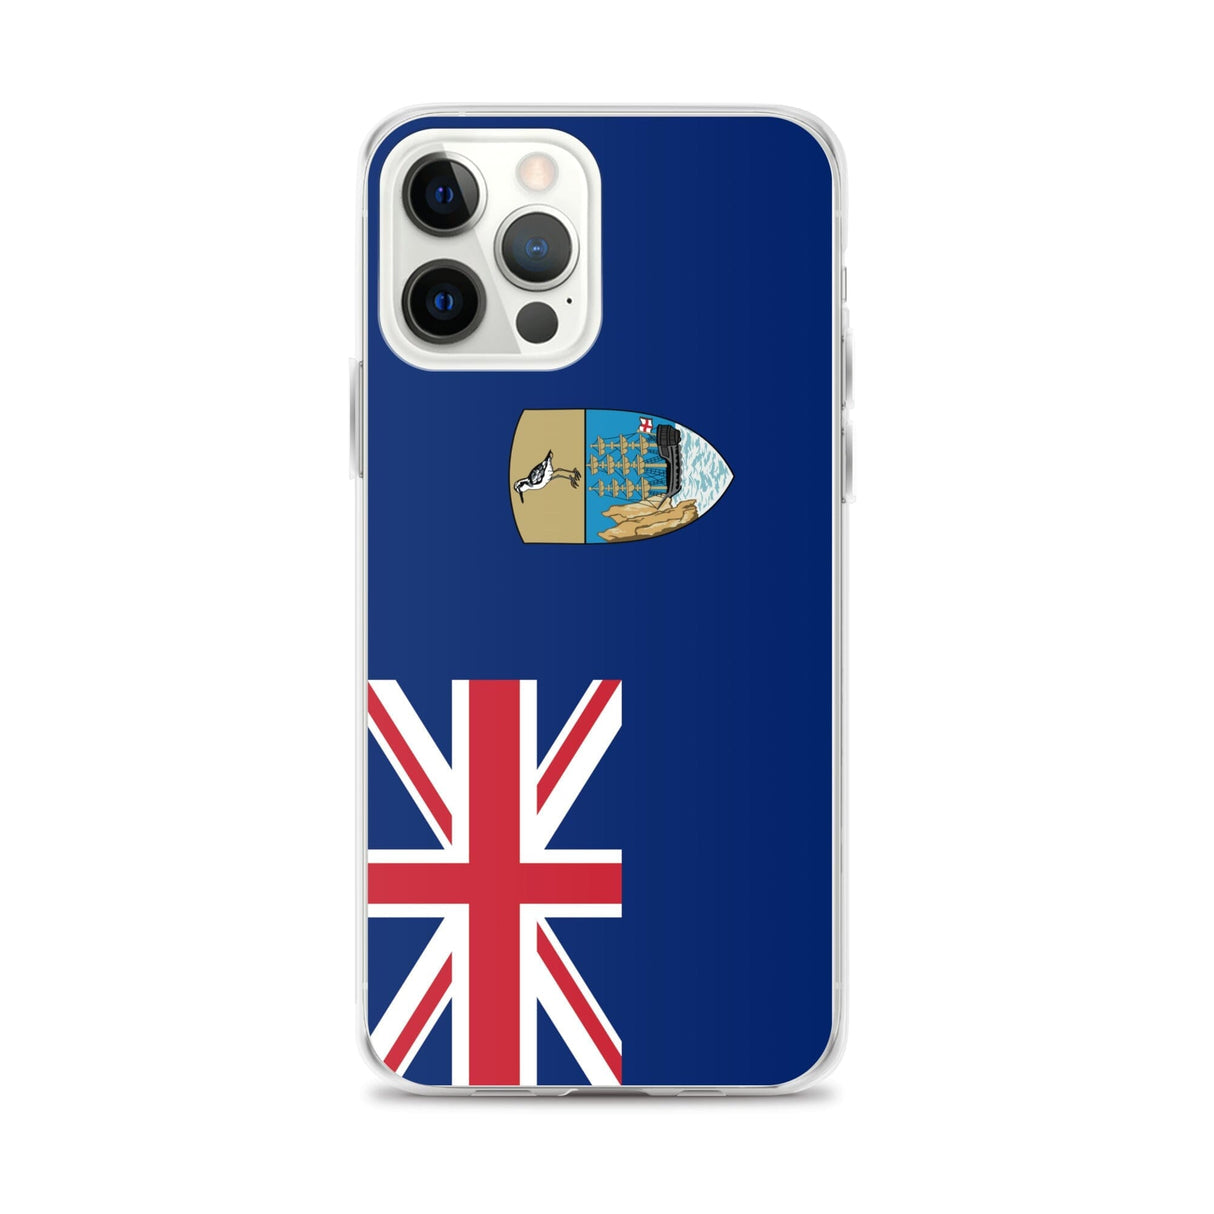 Flag of St. Helena, Ascension and Tristan da Cunha iPhone Case - Pixelforma